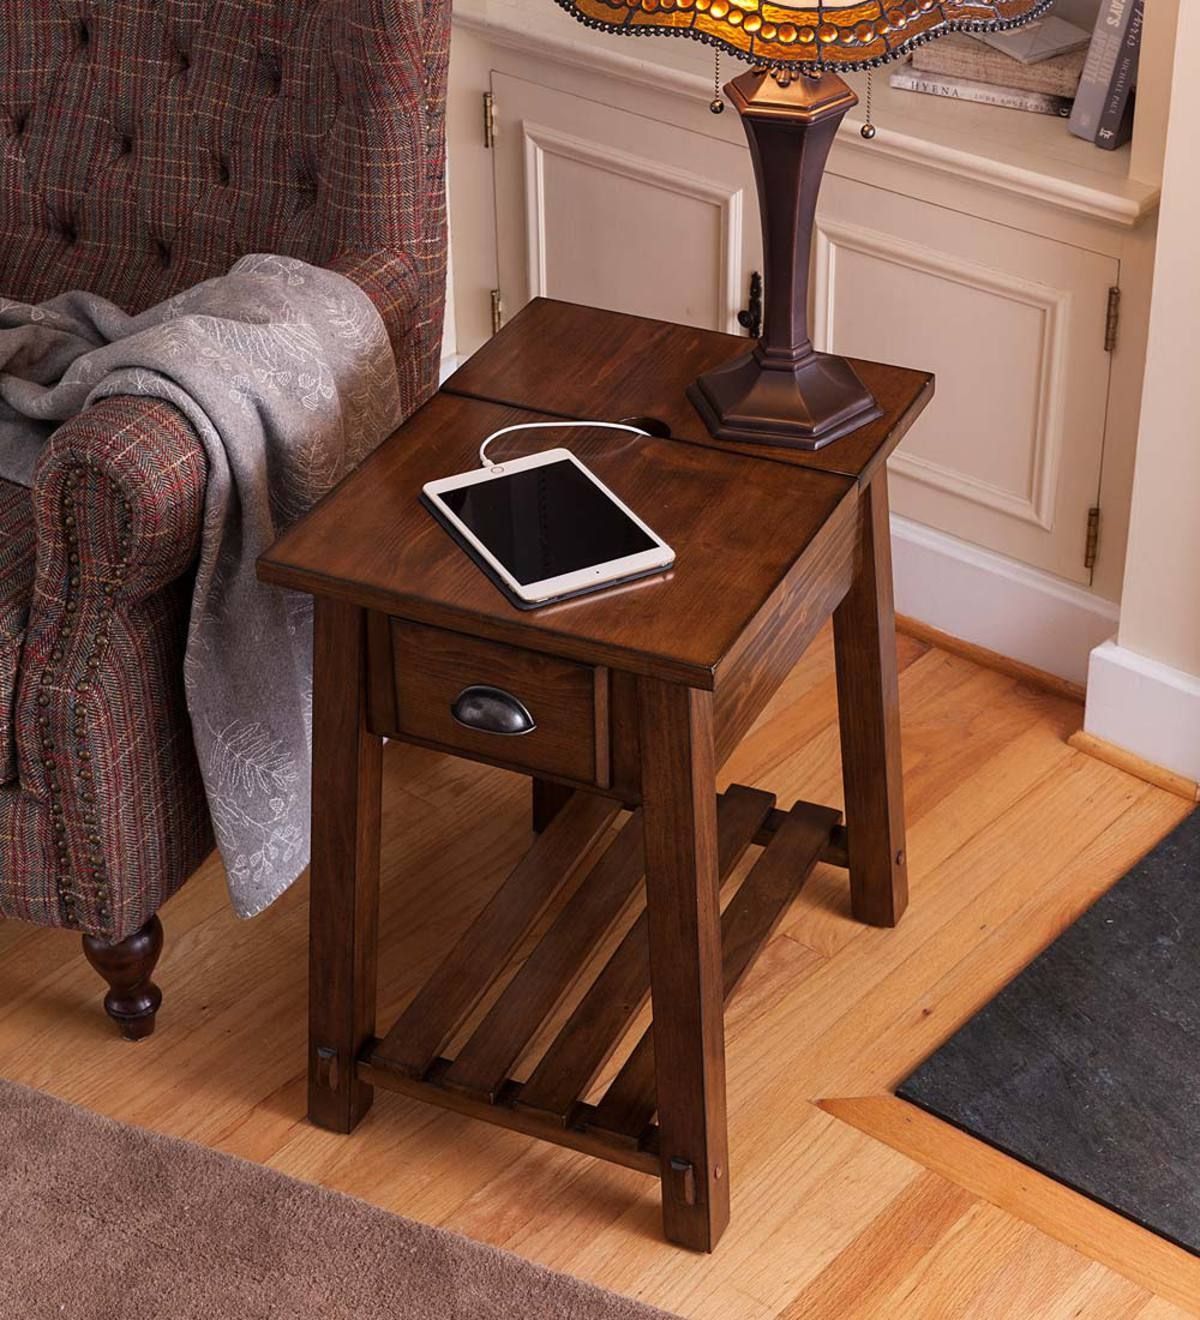 End Table With Charging Station – Visualhunt Inside Coffee Tables With Charging Station (View 5 of 15)